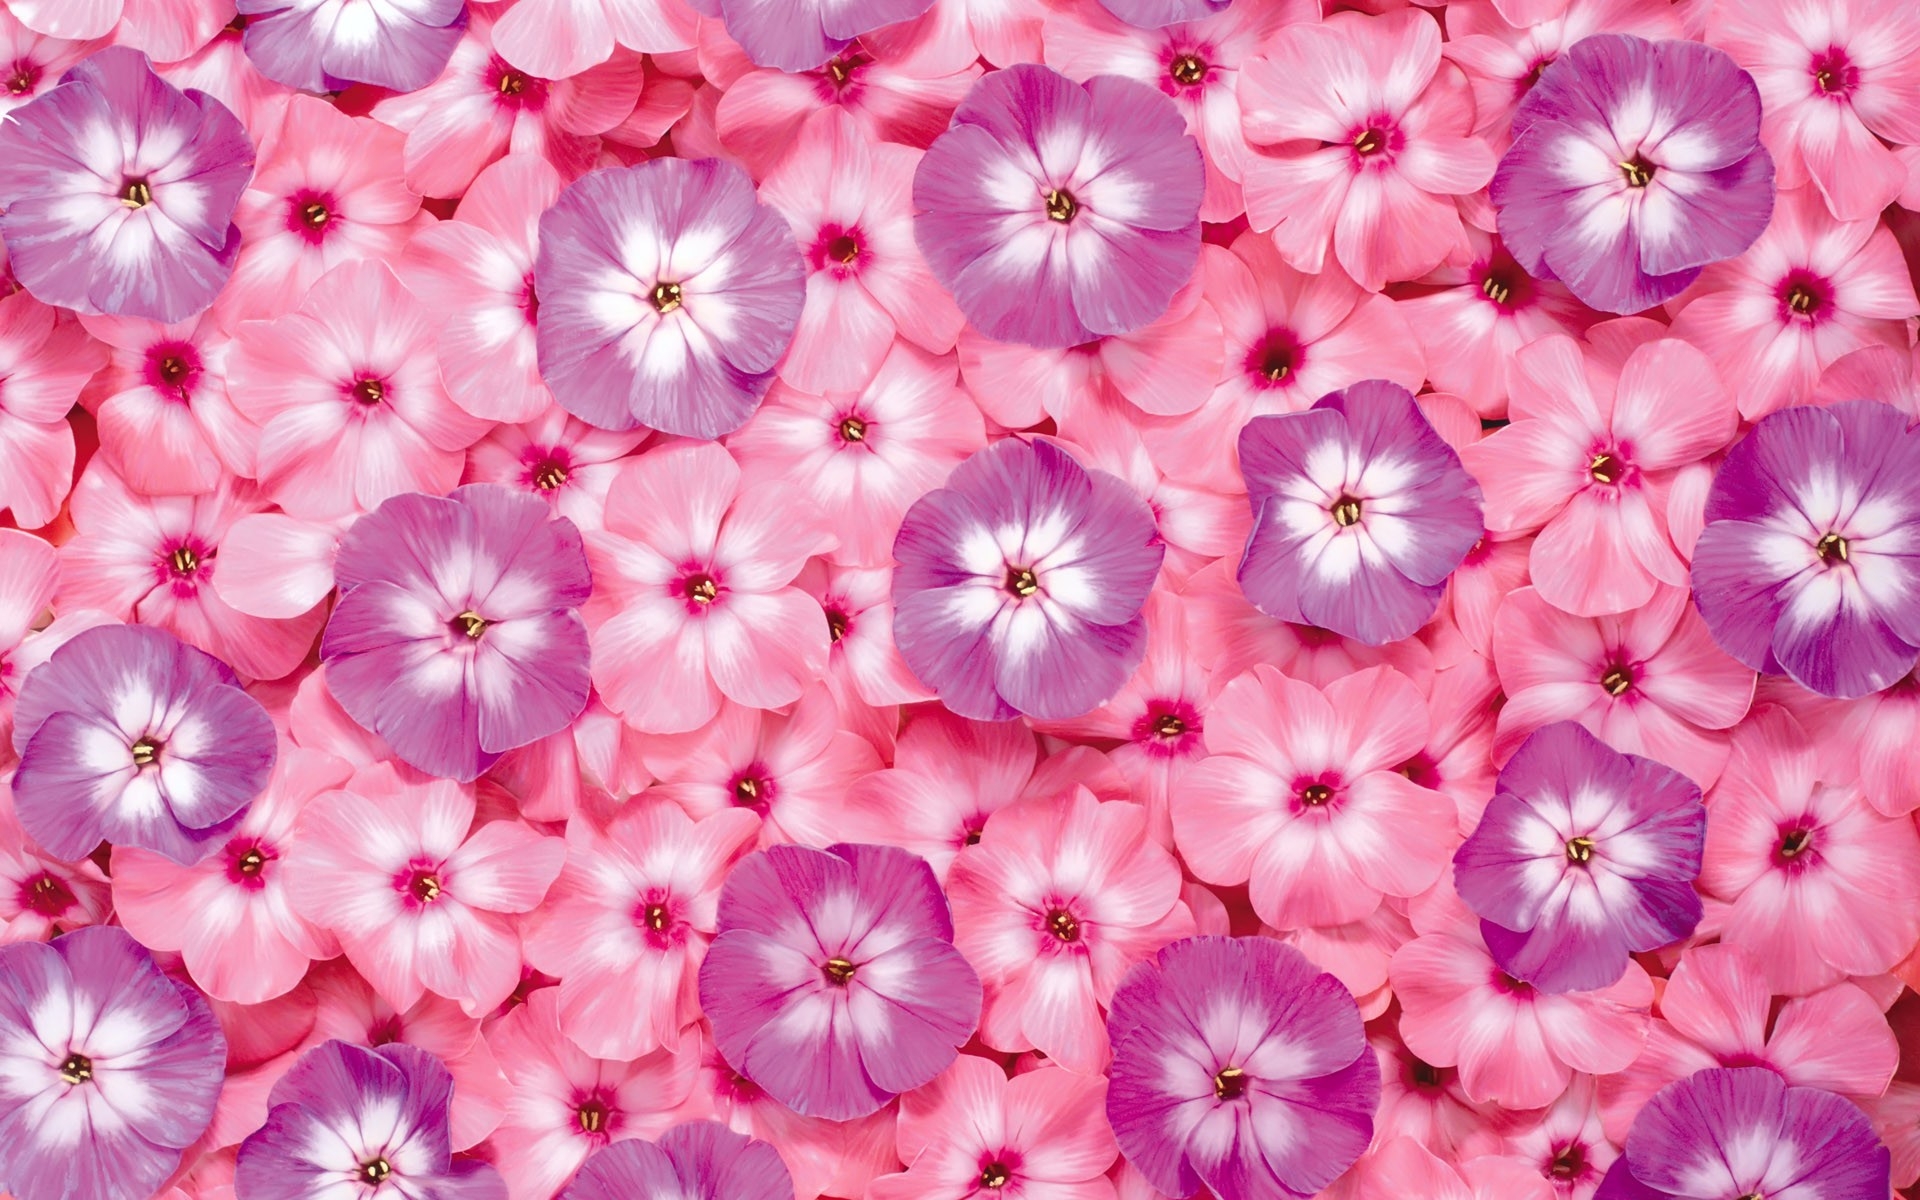 A background of pink flowers